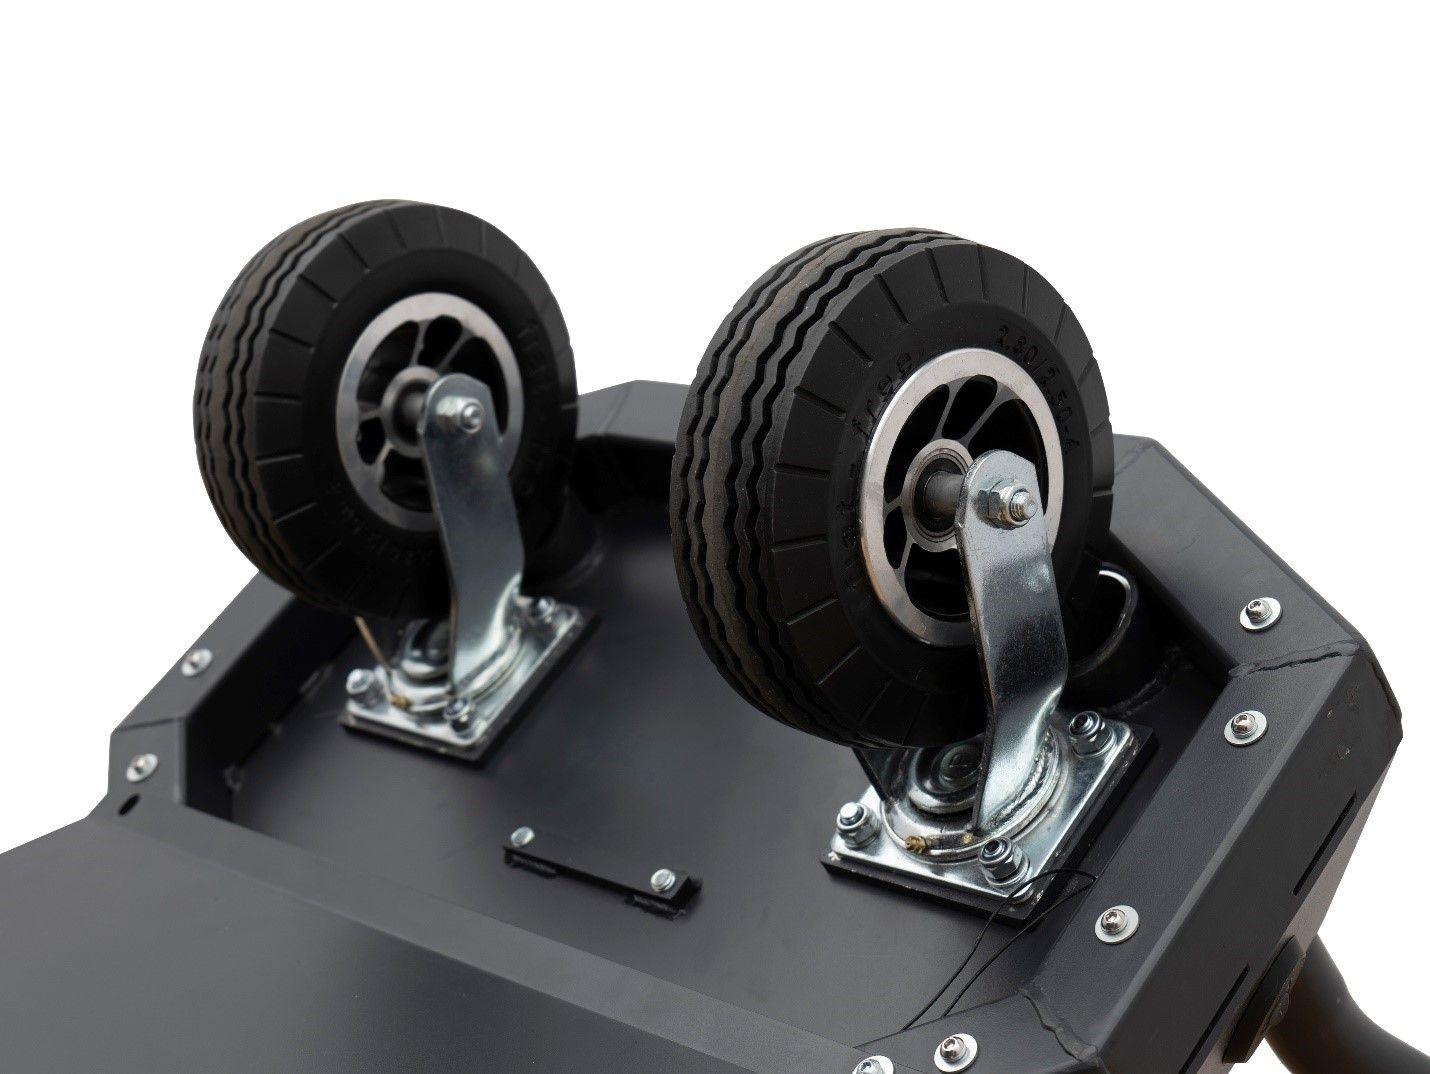 Swiveling caster wheels for multiplanar movements